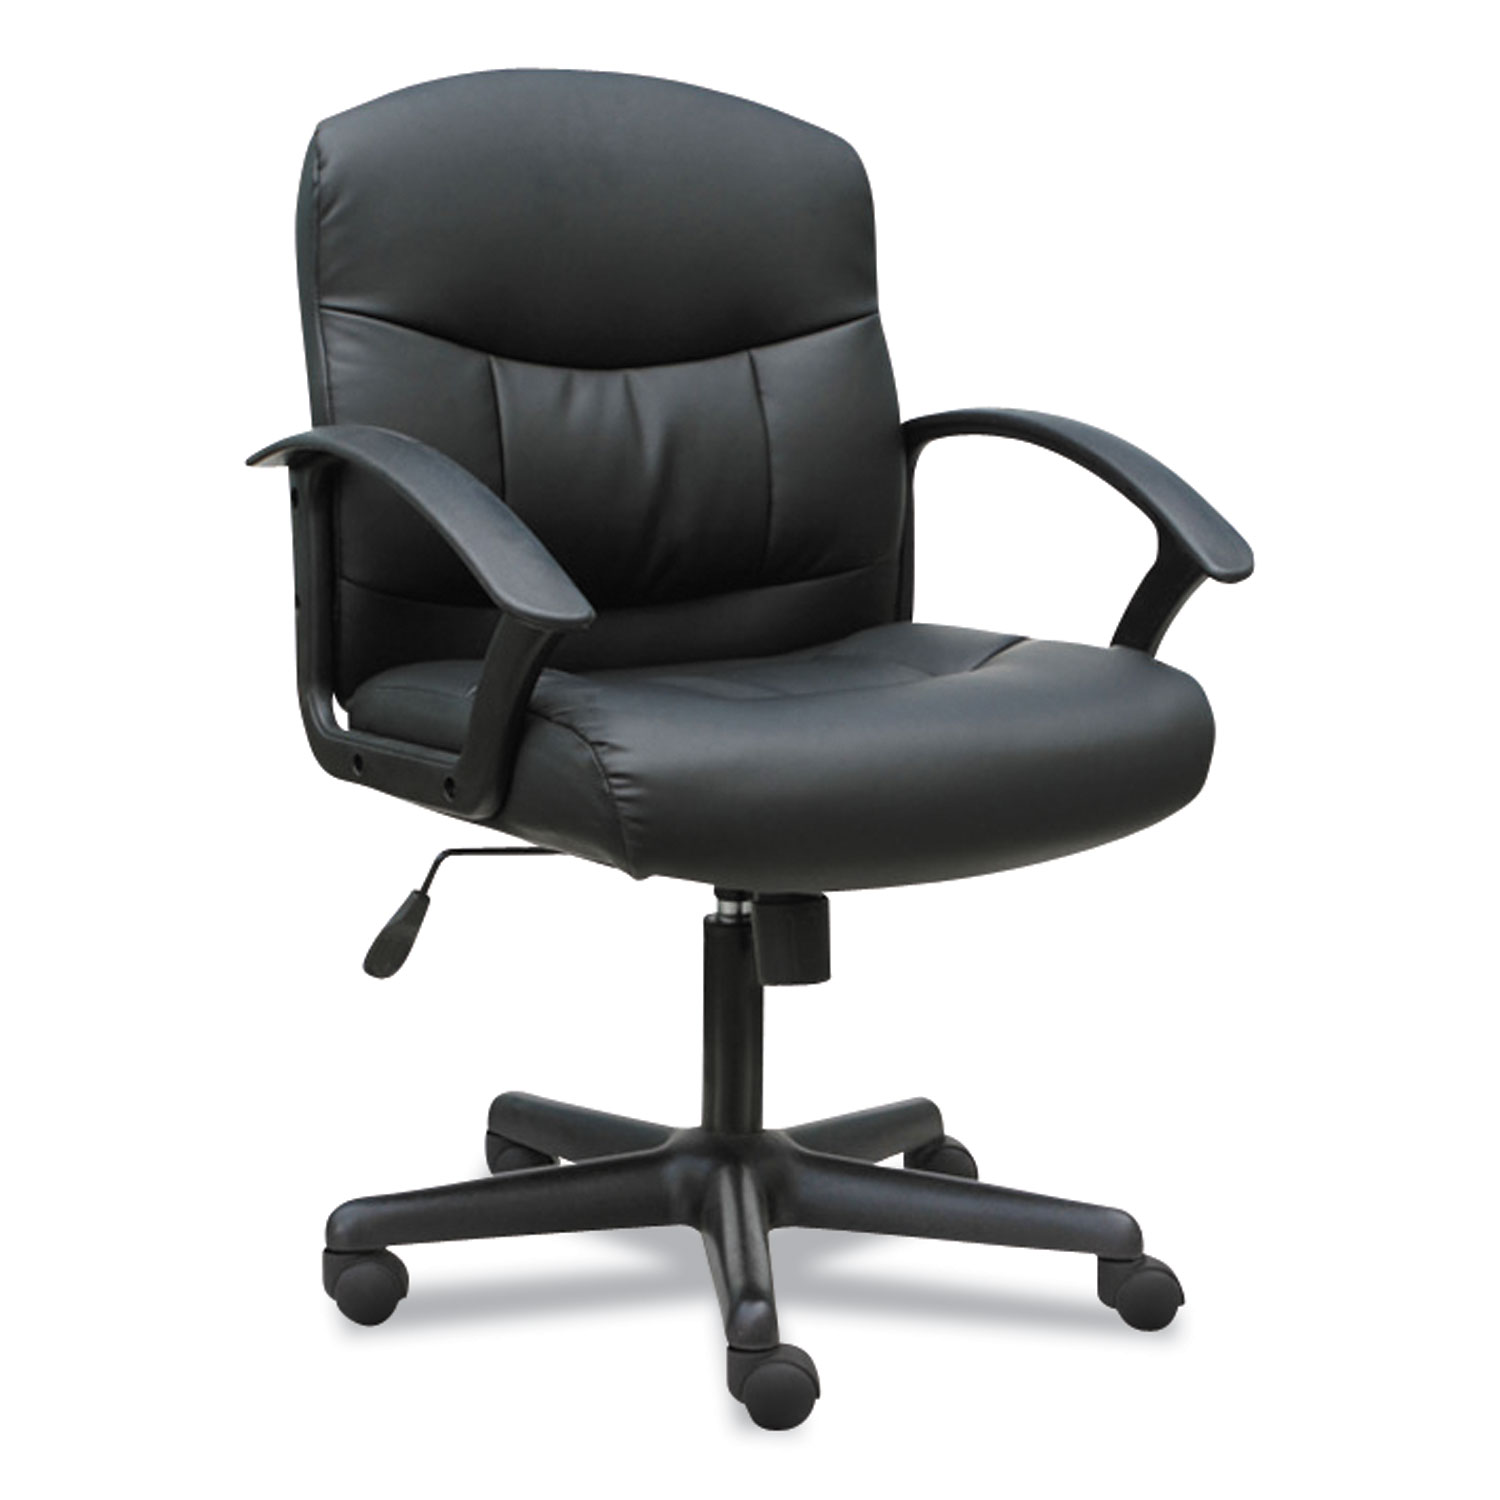  Sadie BSXVST303 3-Oh-Three Mid-Back Executive Leather Chair, Supports up to 250 lbs., Black Seat/Black Back, Black Base (BSXVST303) 